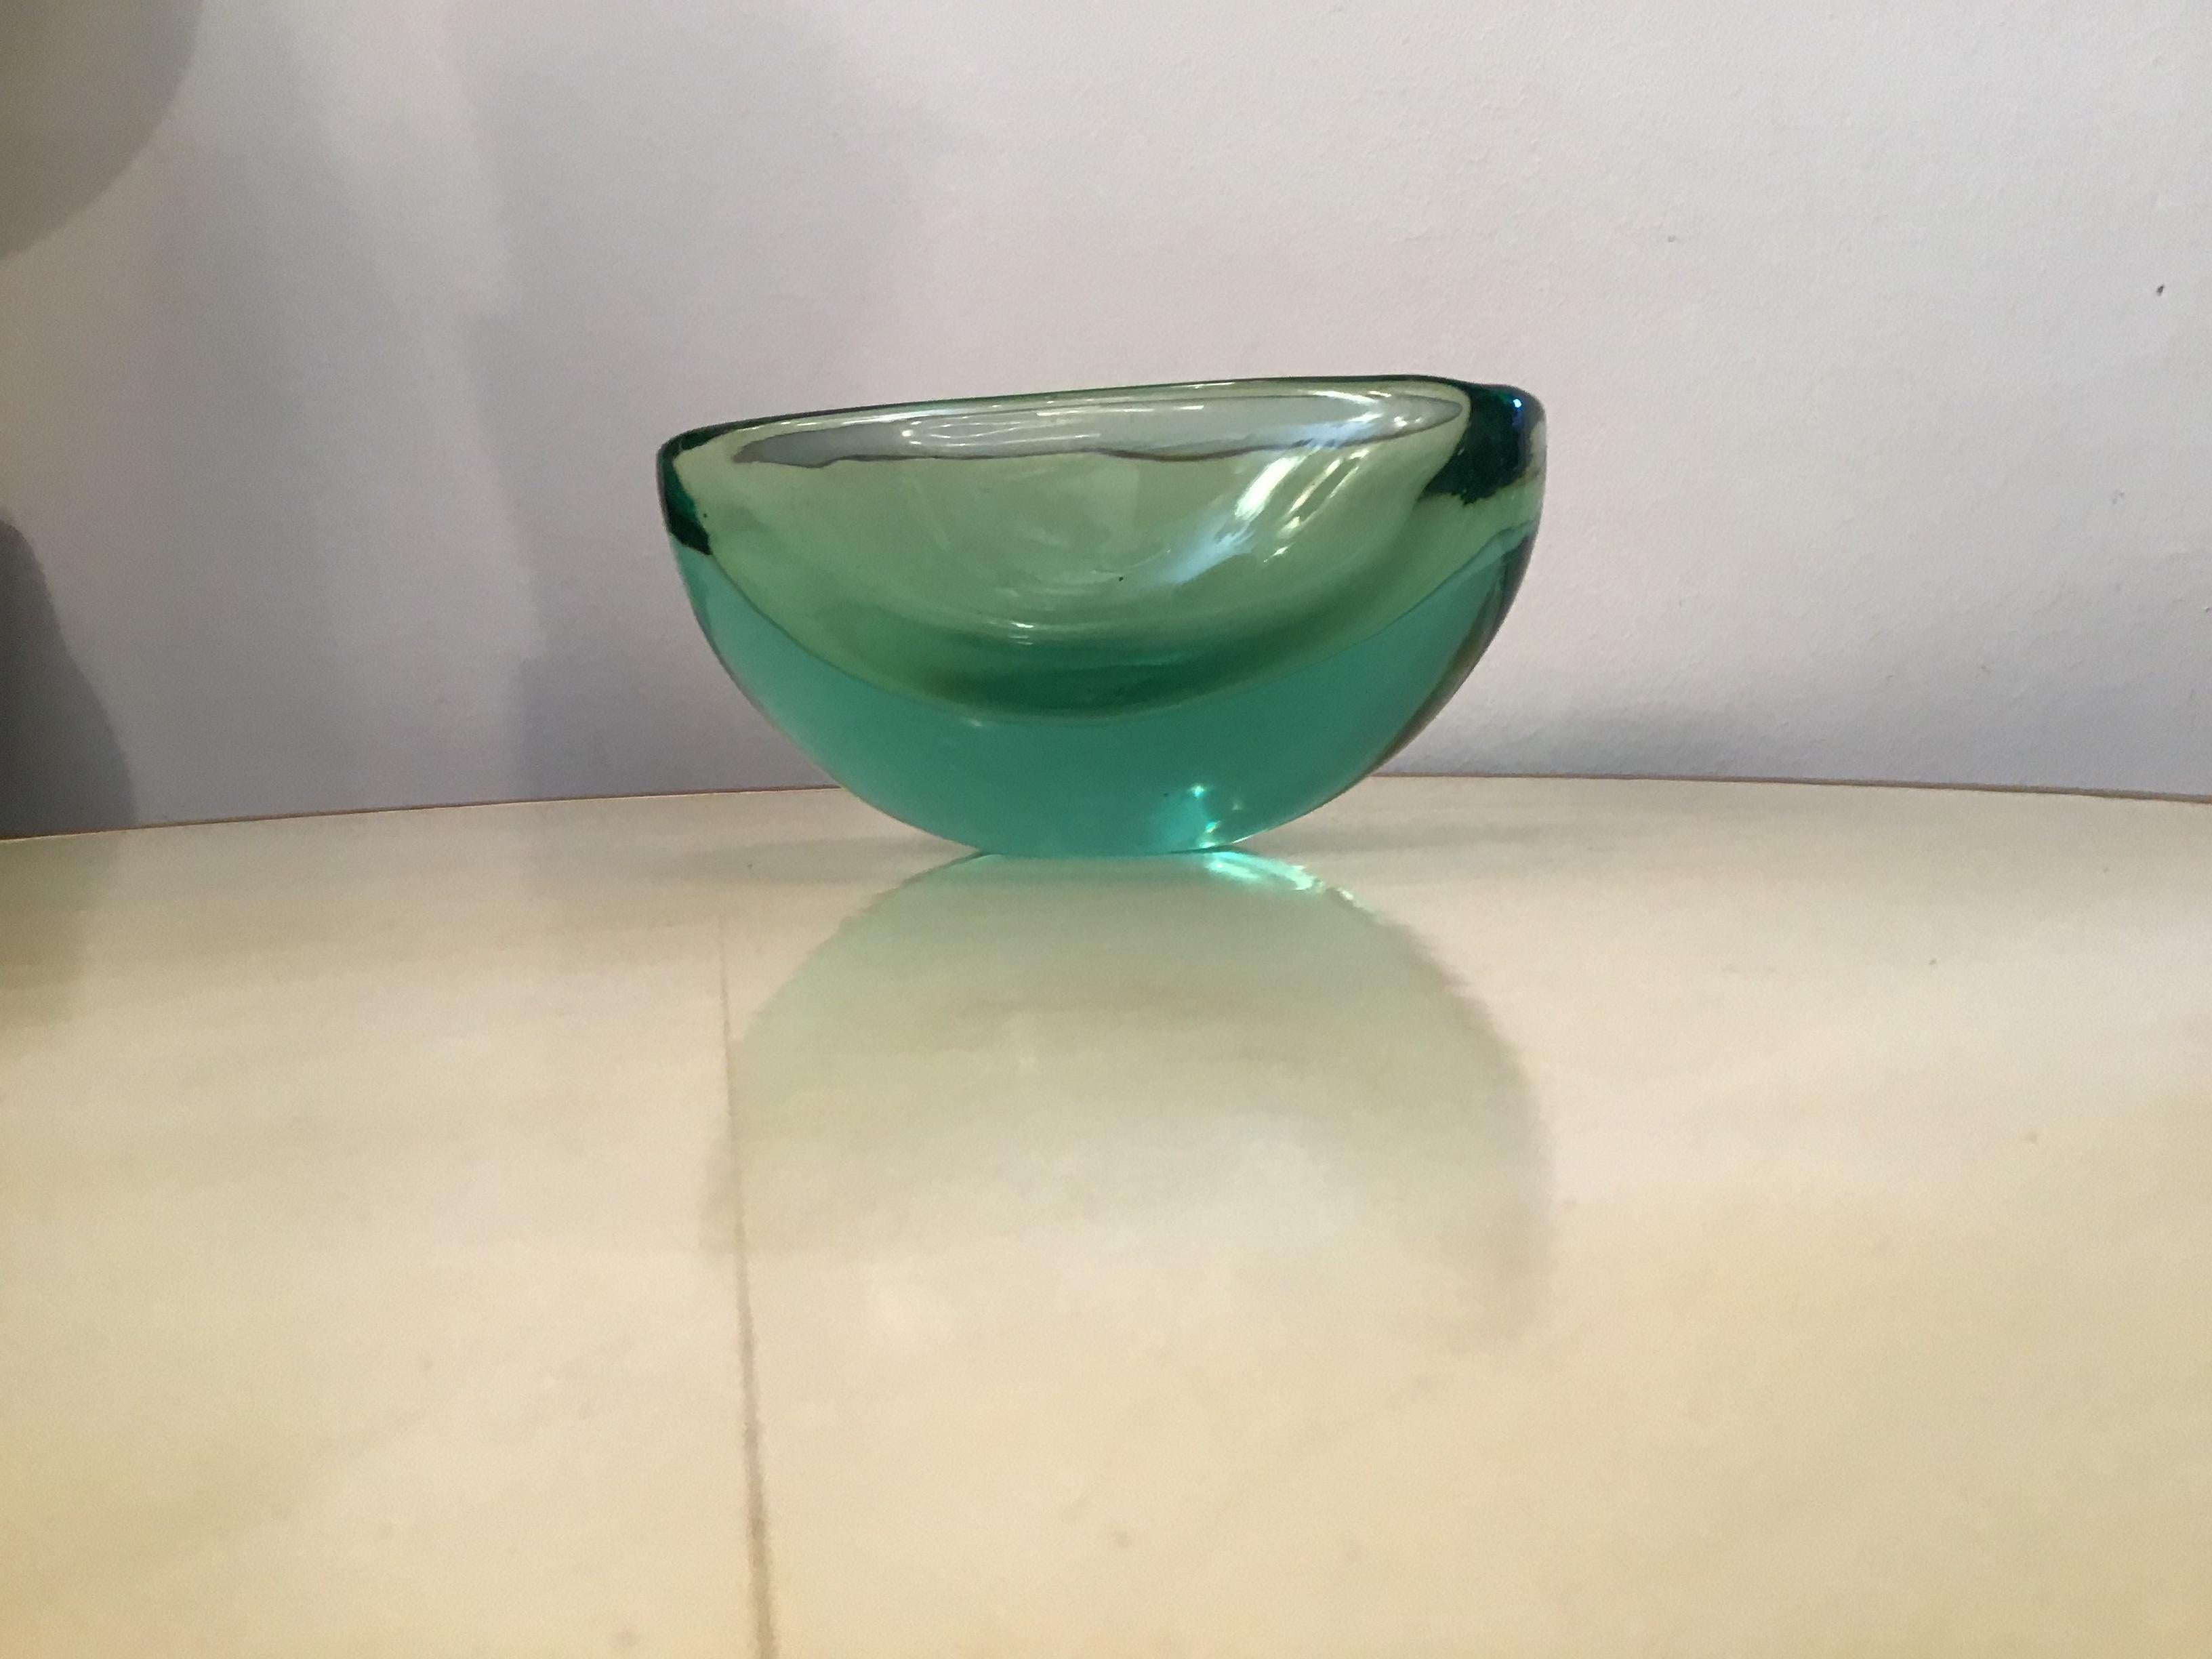 Archimede Seguso Oval Bowl, Green Submerged Glass Centrepiece, 1950 In Excellent Condition For Sale In Milano, IT